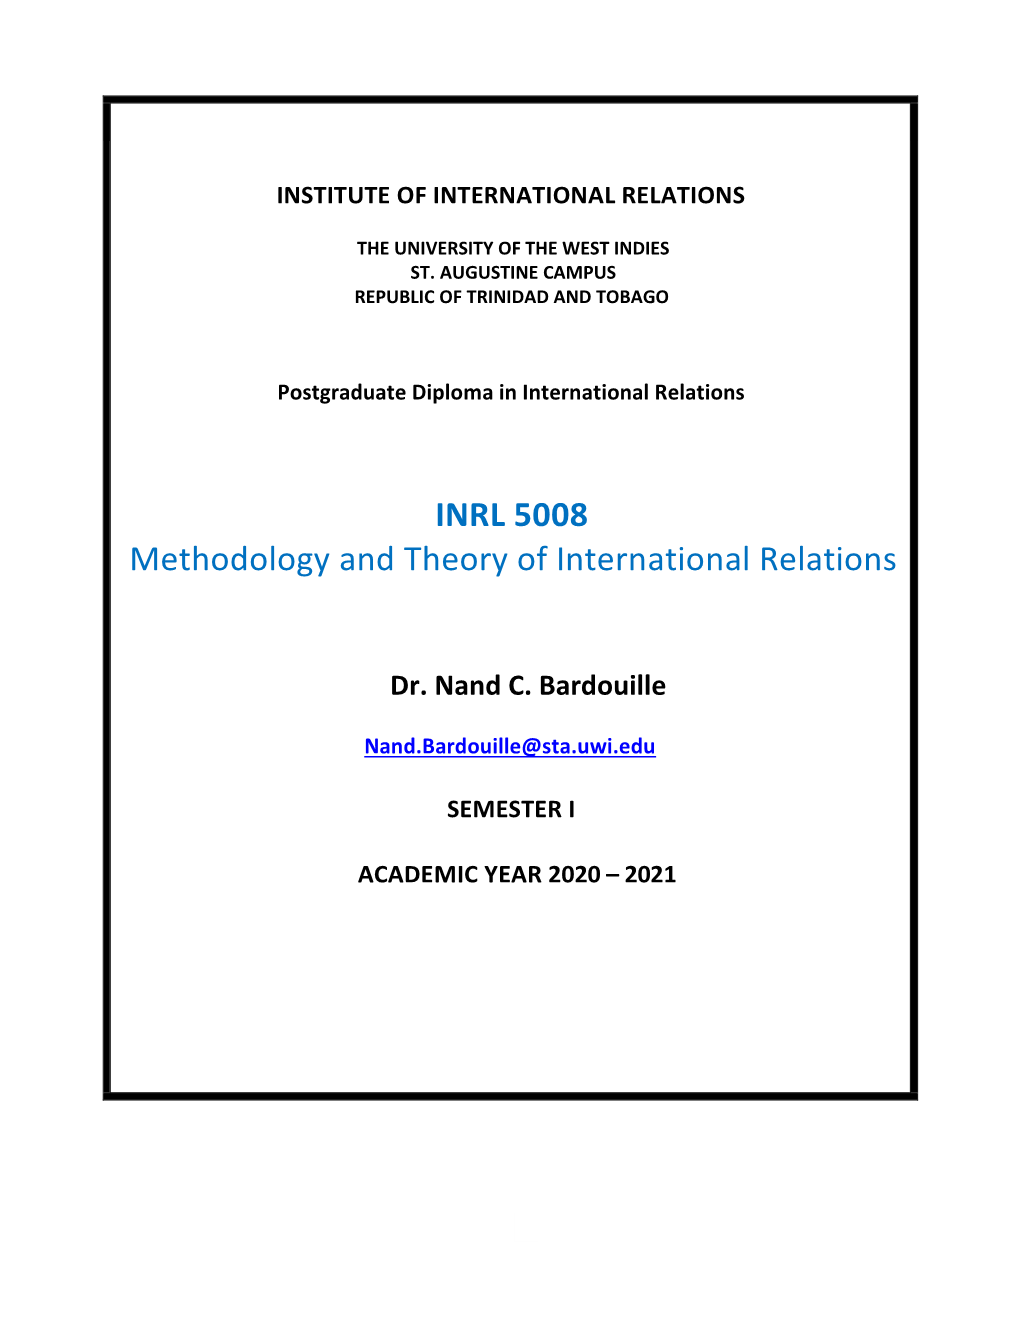 INRL 5008 Methodology and Theory of International Relations